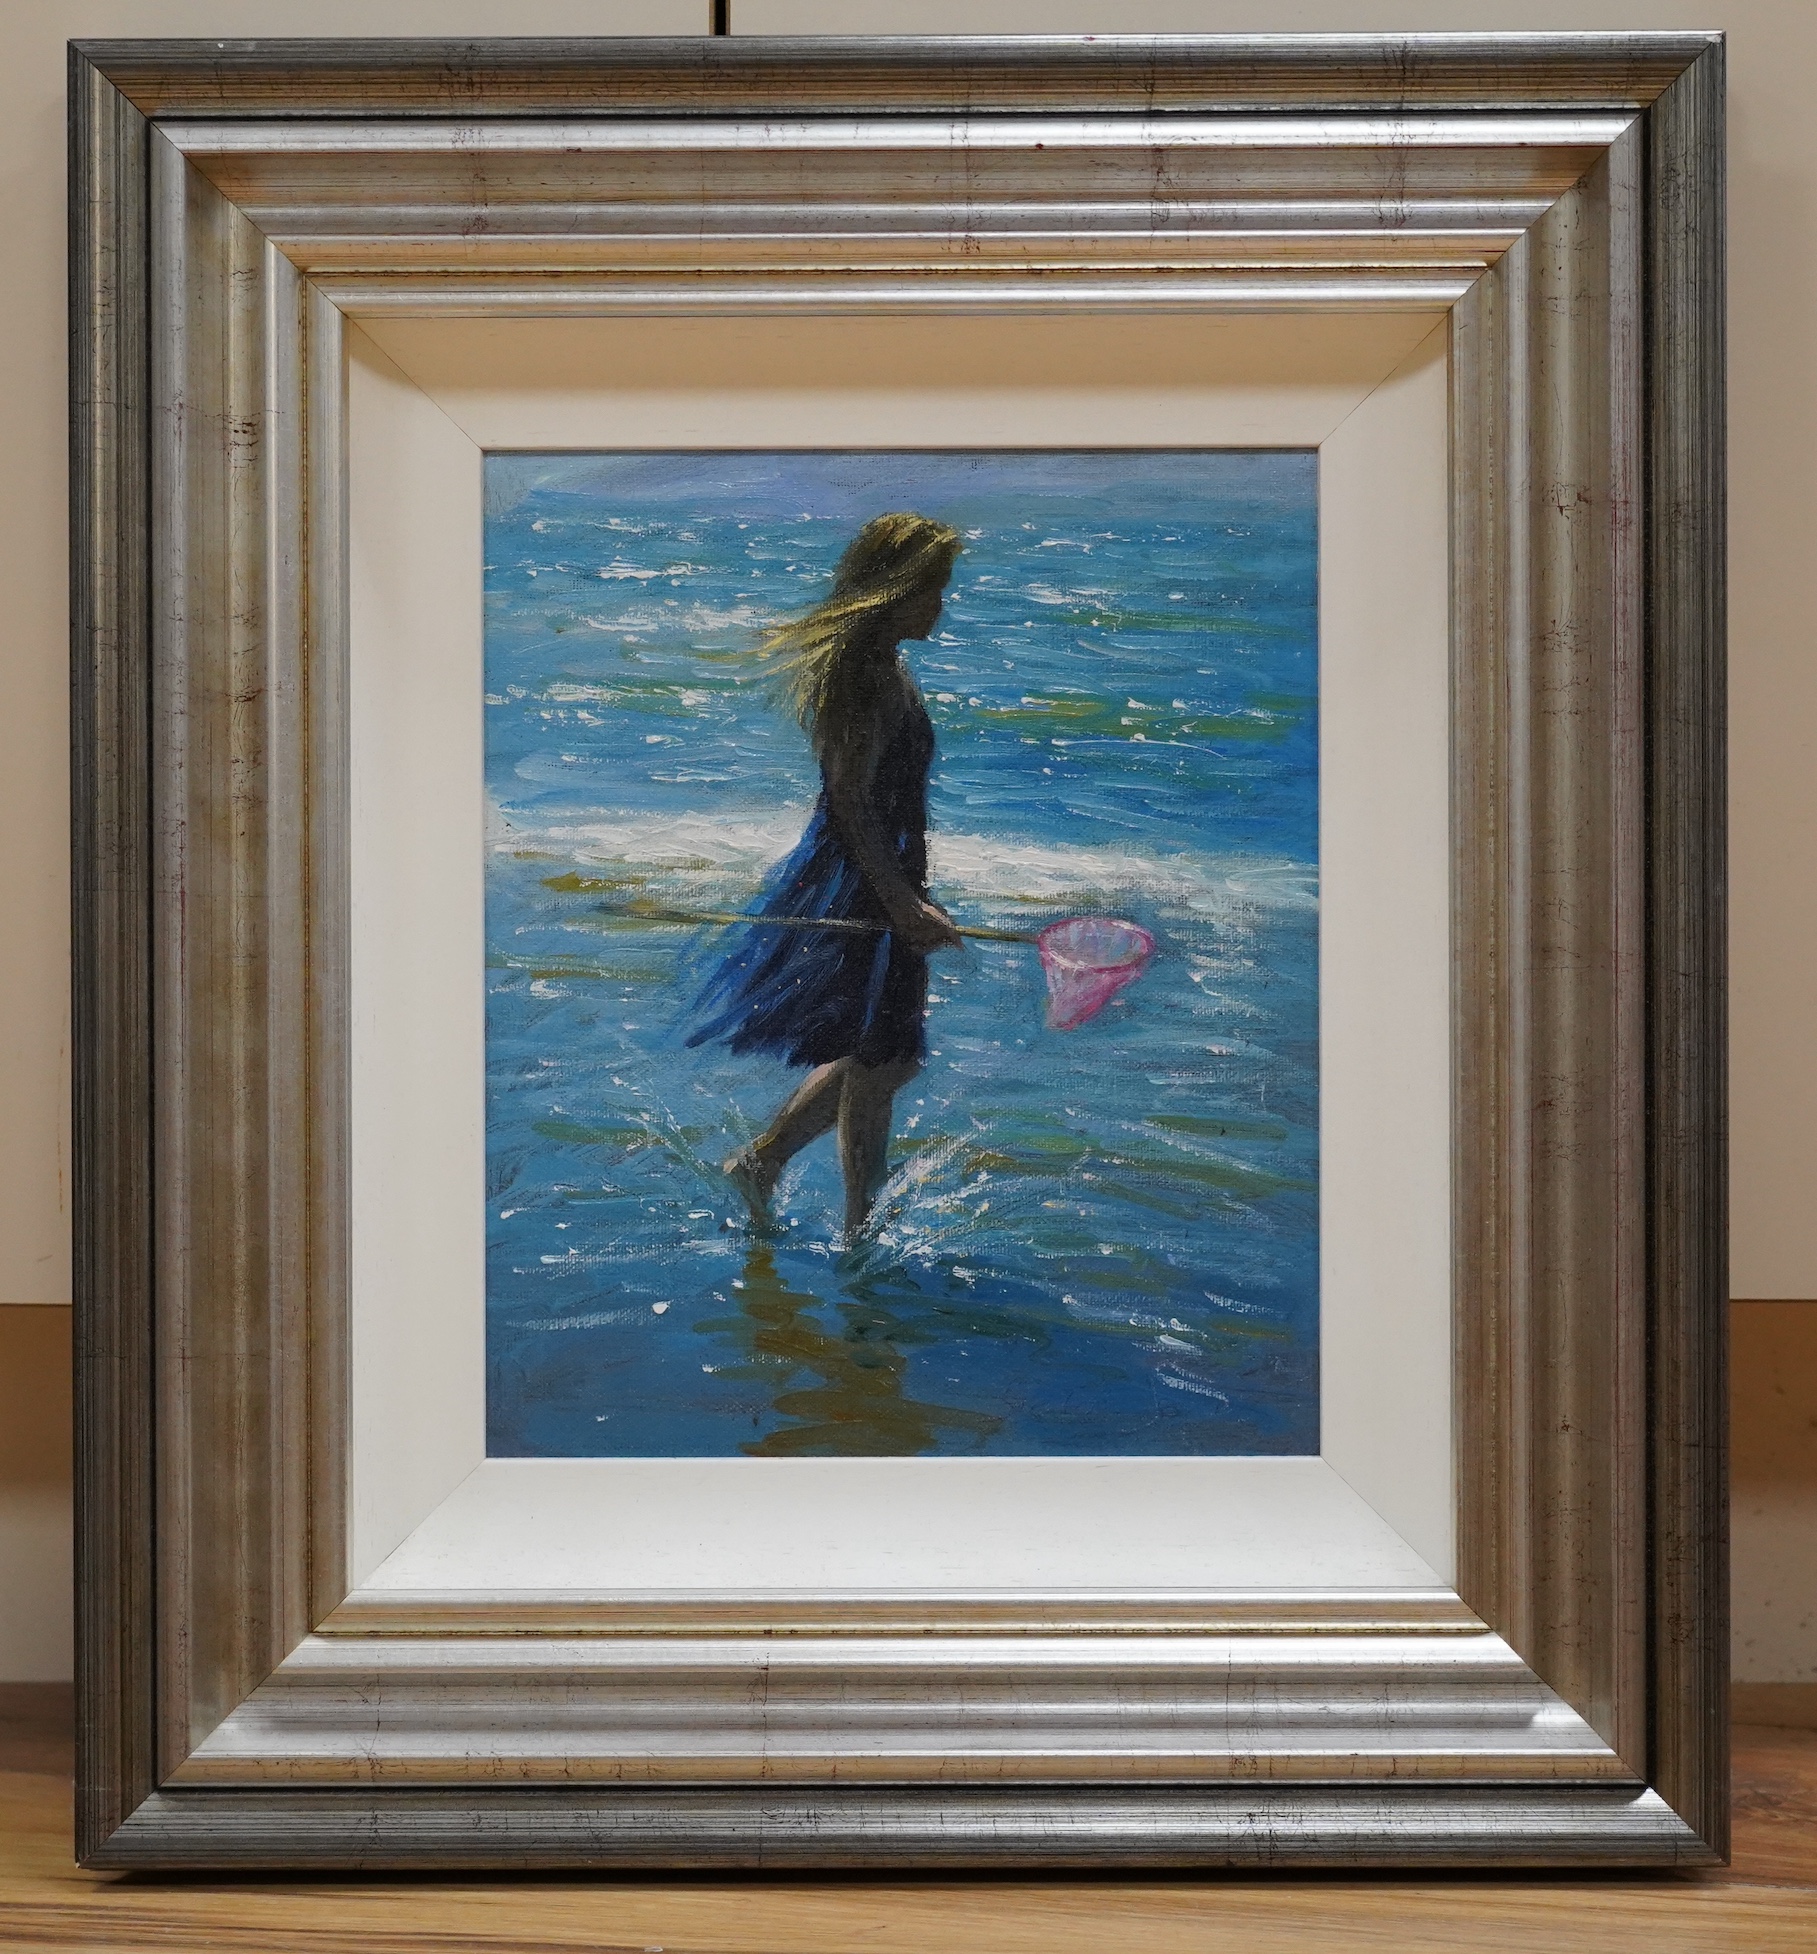 Stephen Jones (1959-2017), oil on canvas board, Girl with fishing net, signed, 29 x 24cm